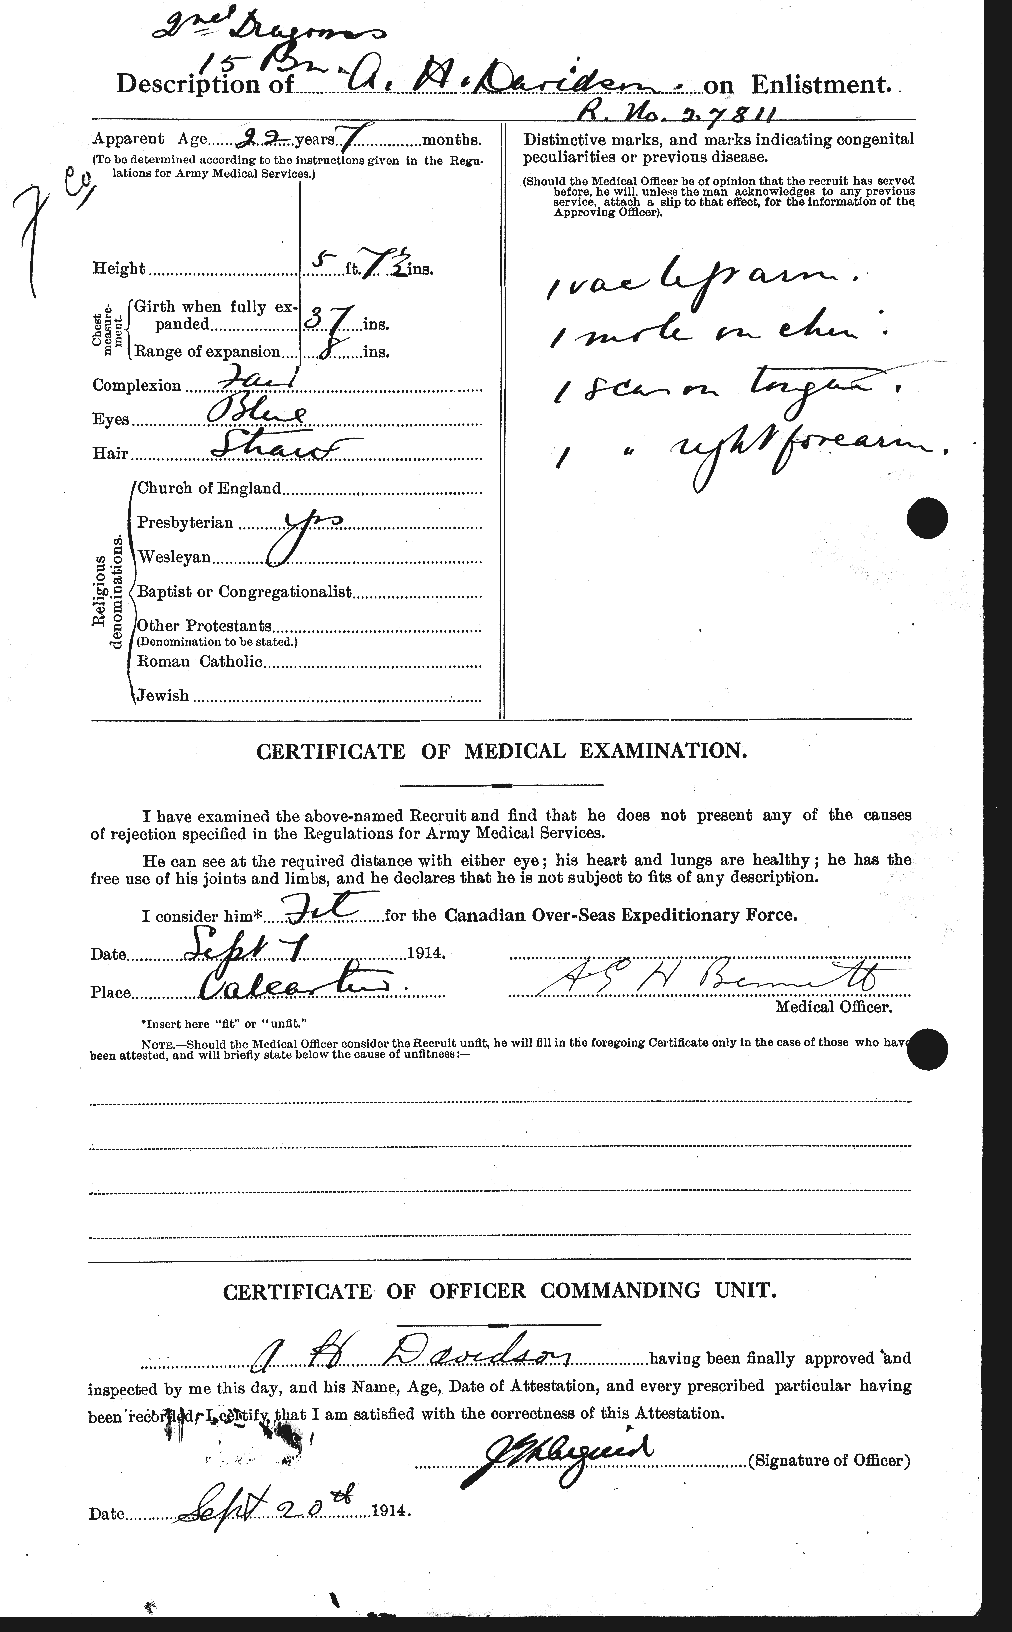 Personnel Records of the First World War - CEF 280752b